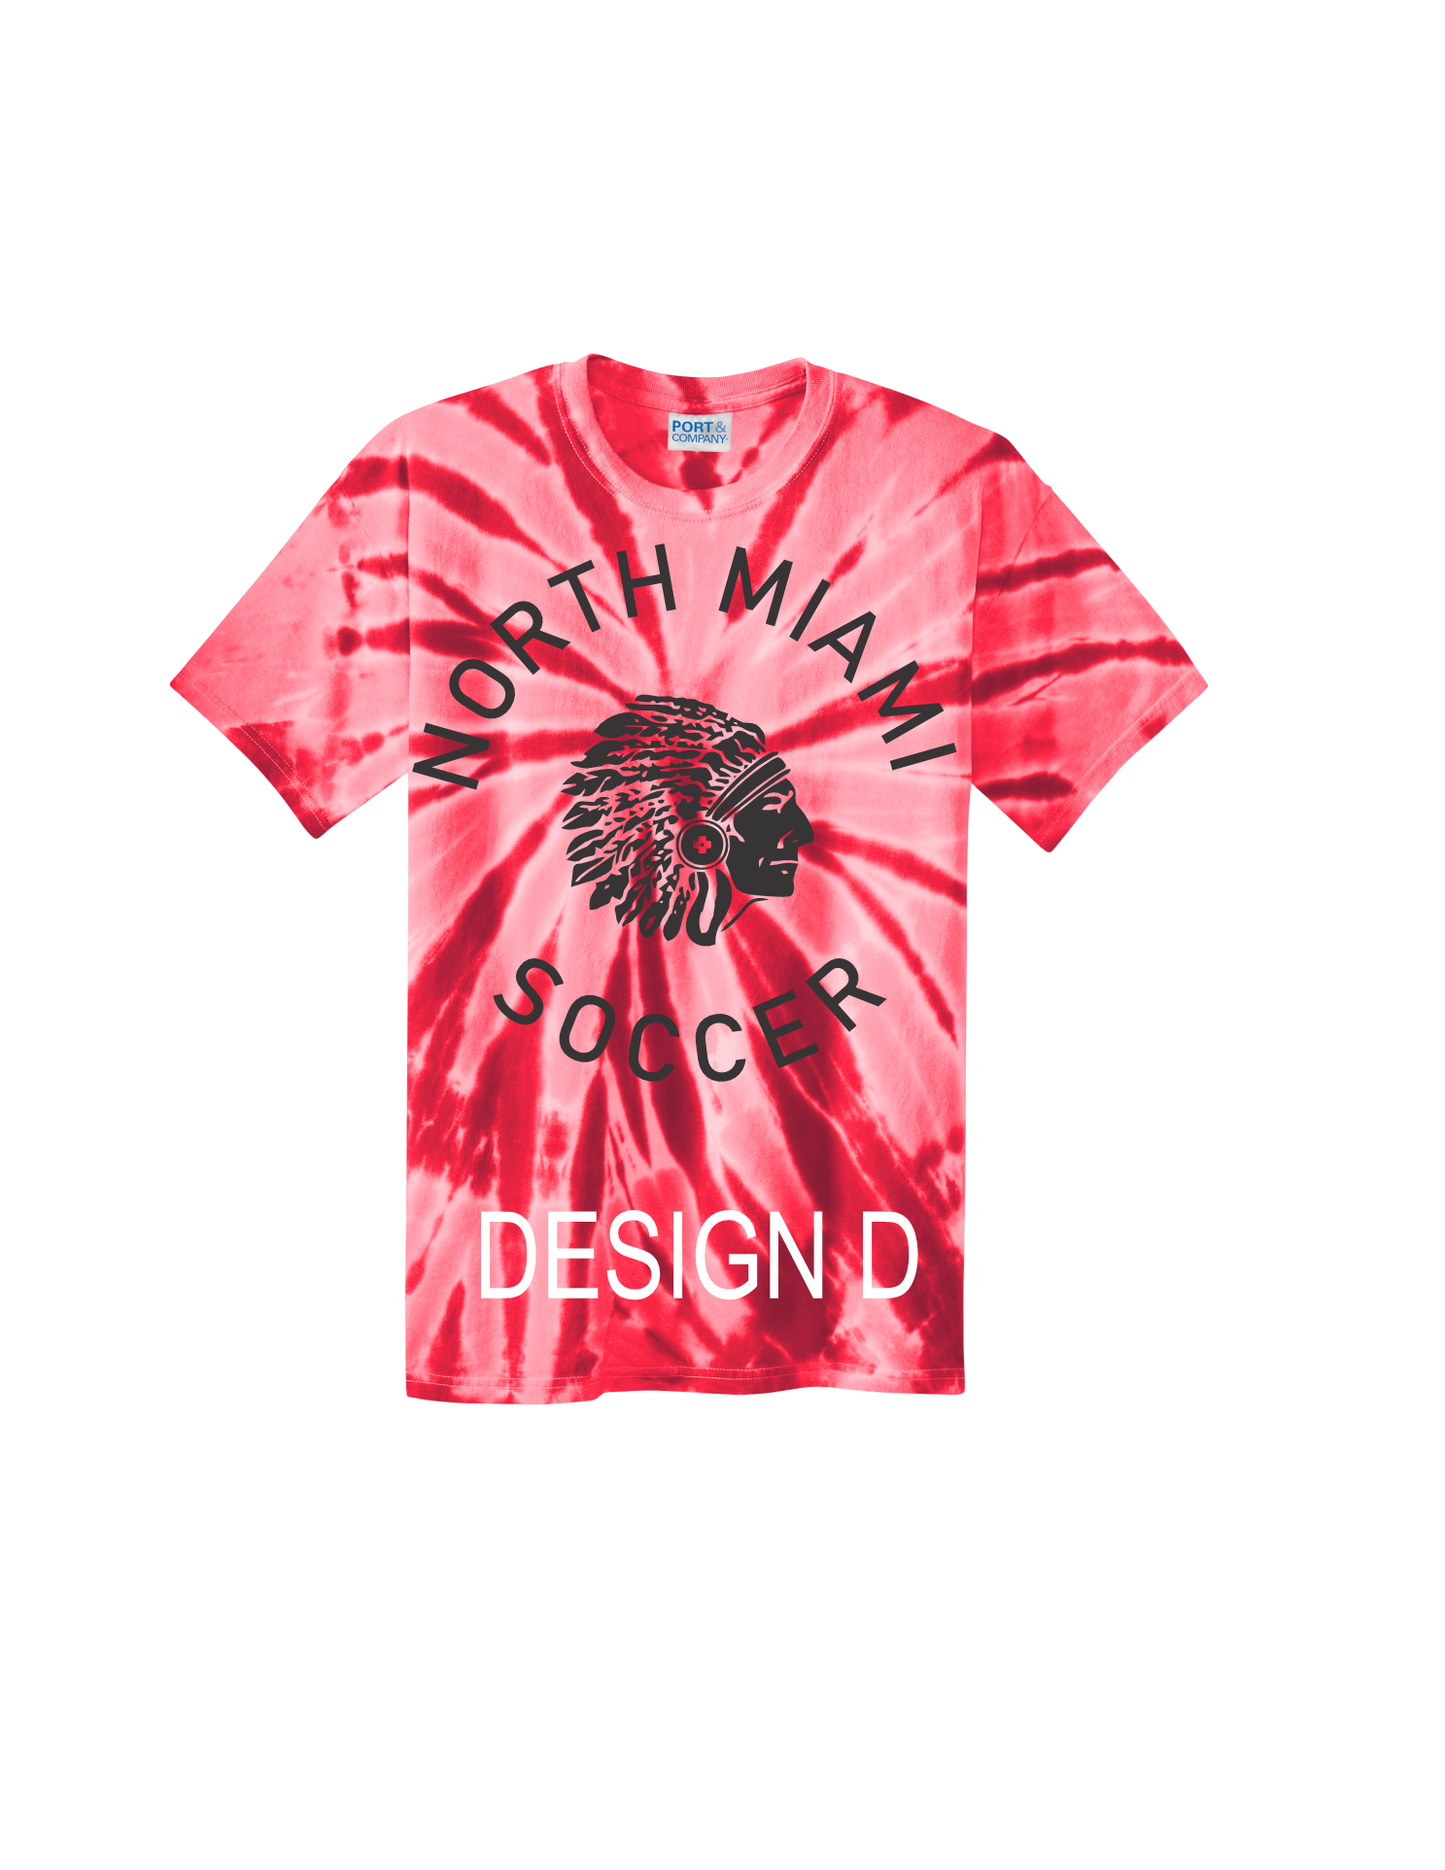 Red Port & Company® Tie-Dye Tee Youth S-XL, Adult S-3X (4 AVAILABLE DESIGNS)